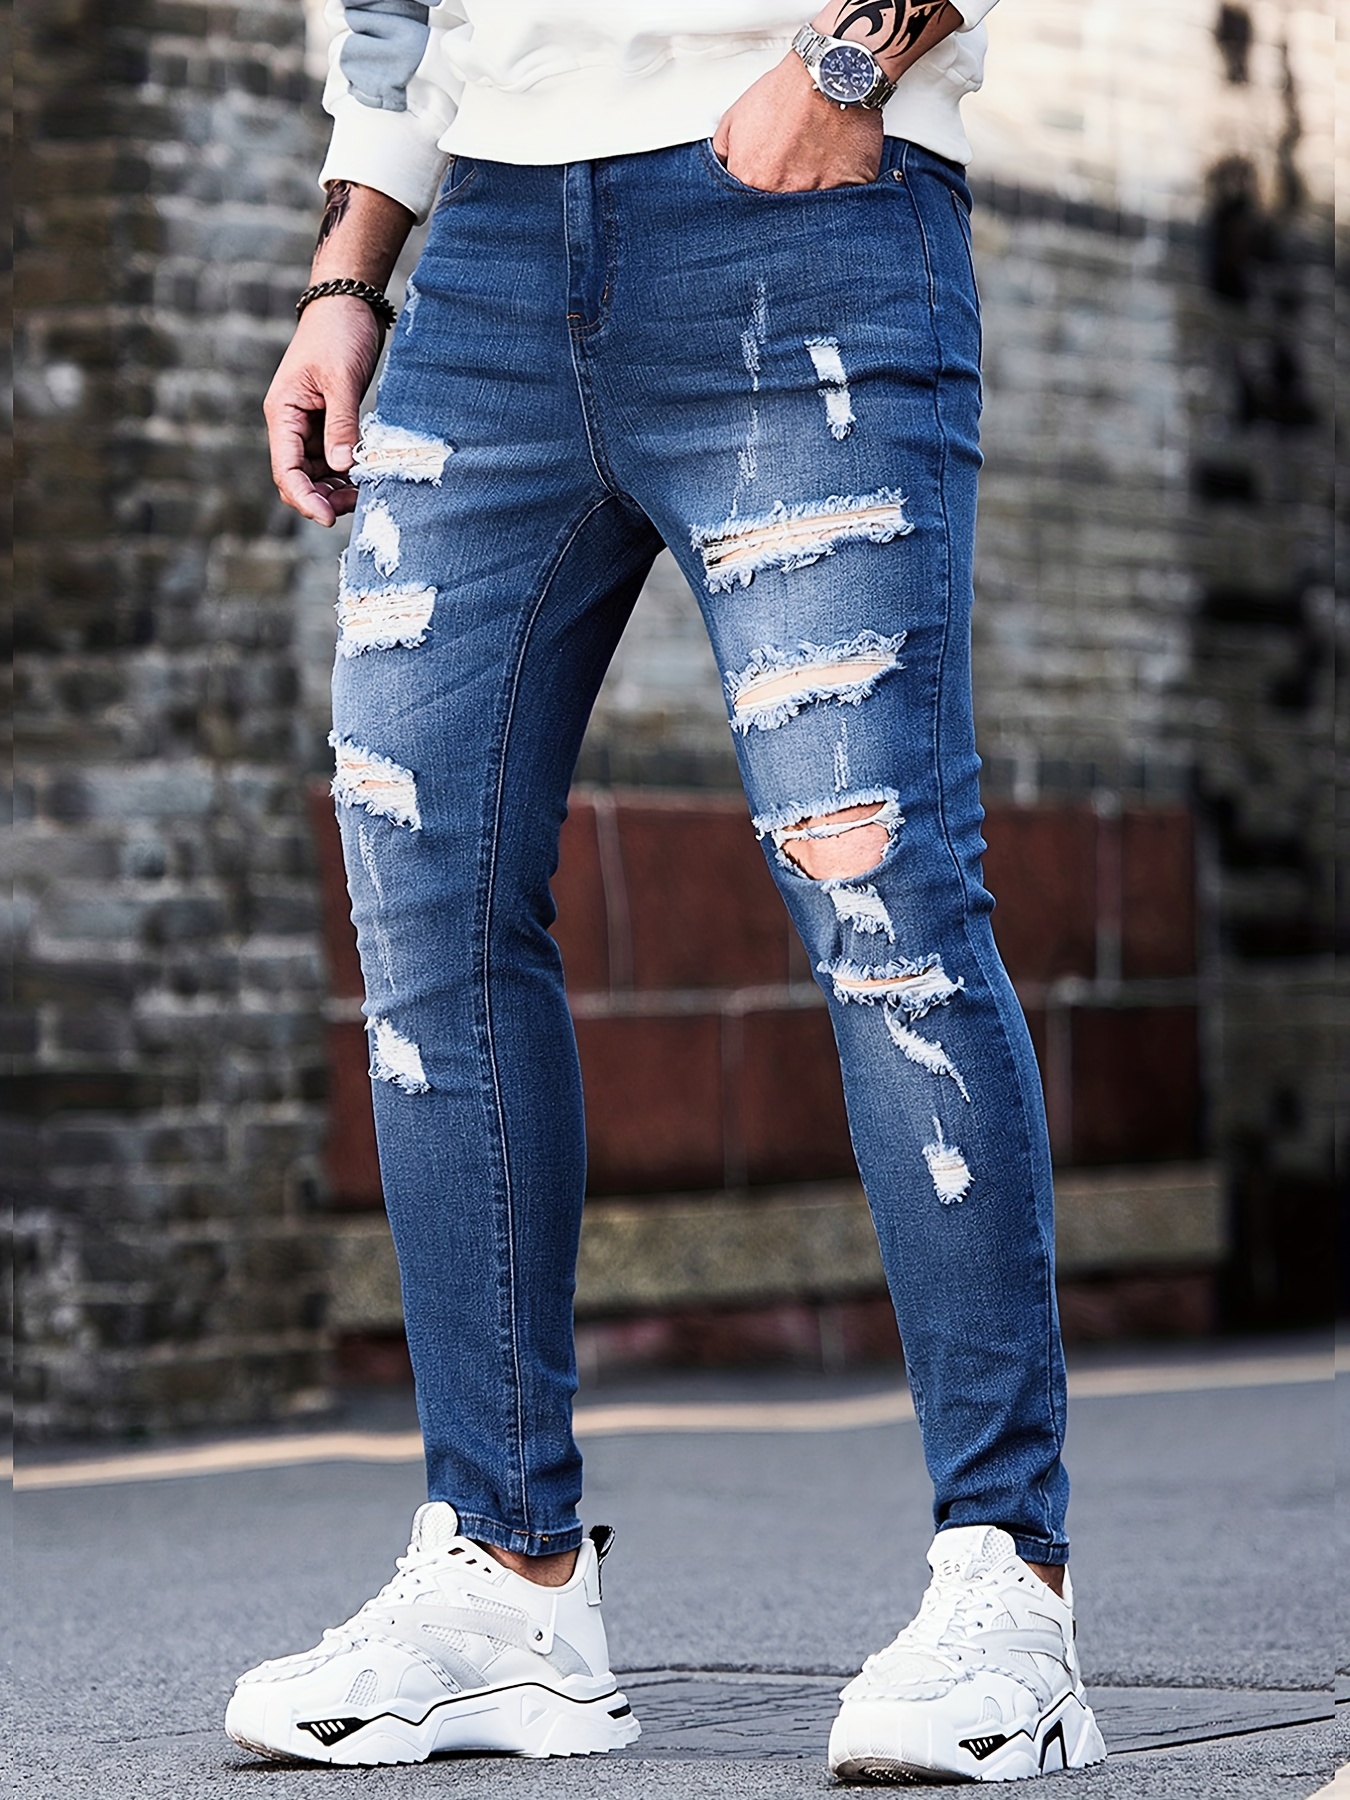 Blue Ripped Jeans For Men Mid-Wasit Slim Fit Denim Pants With Pocket